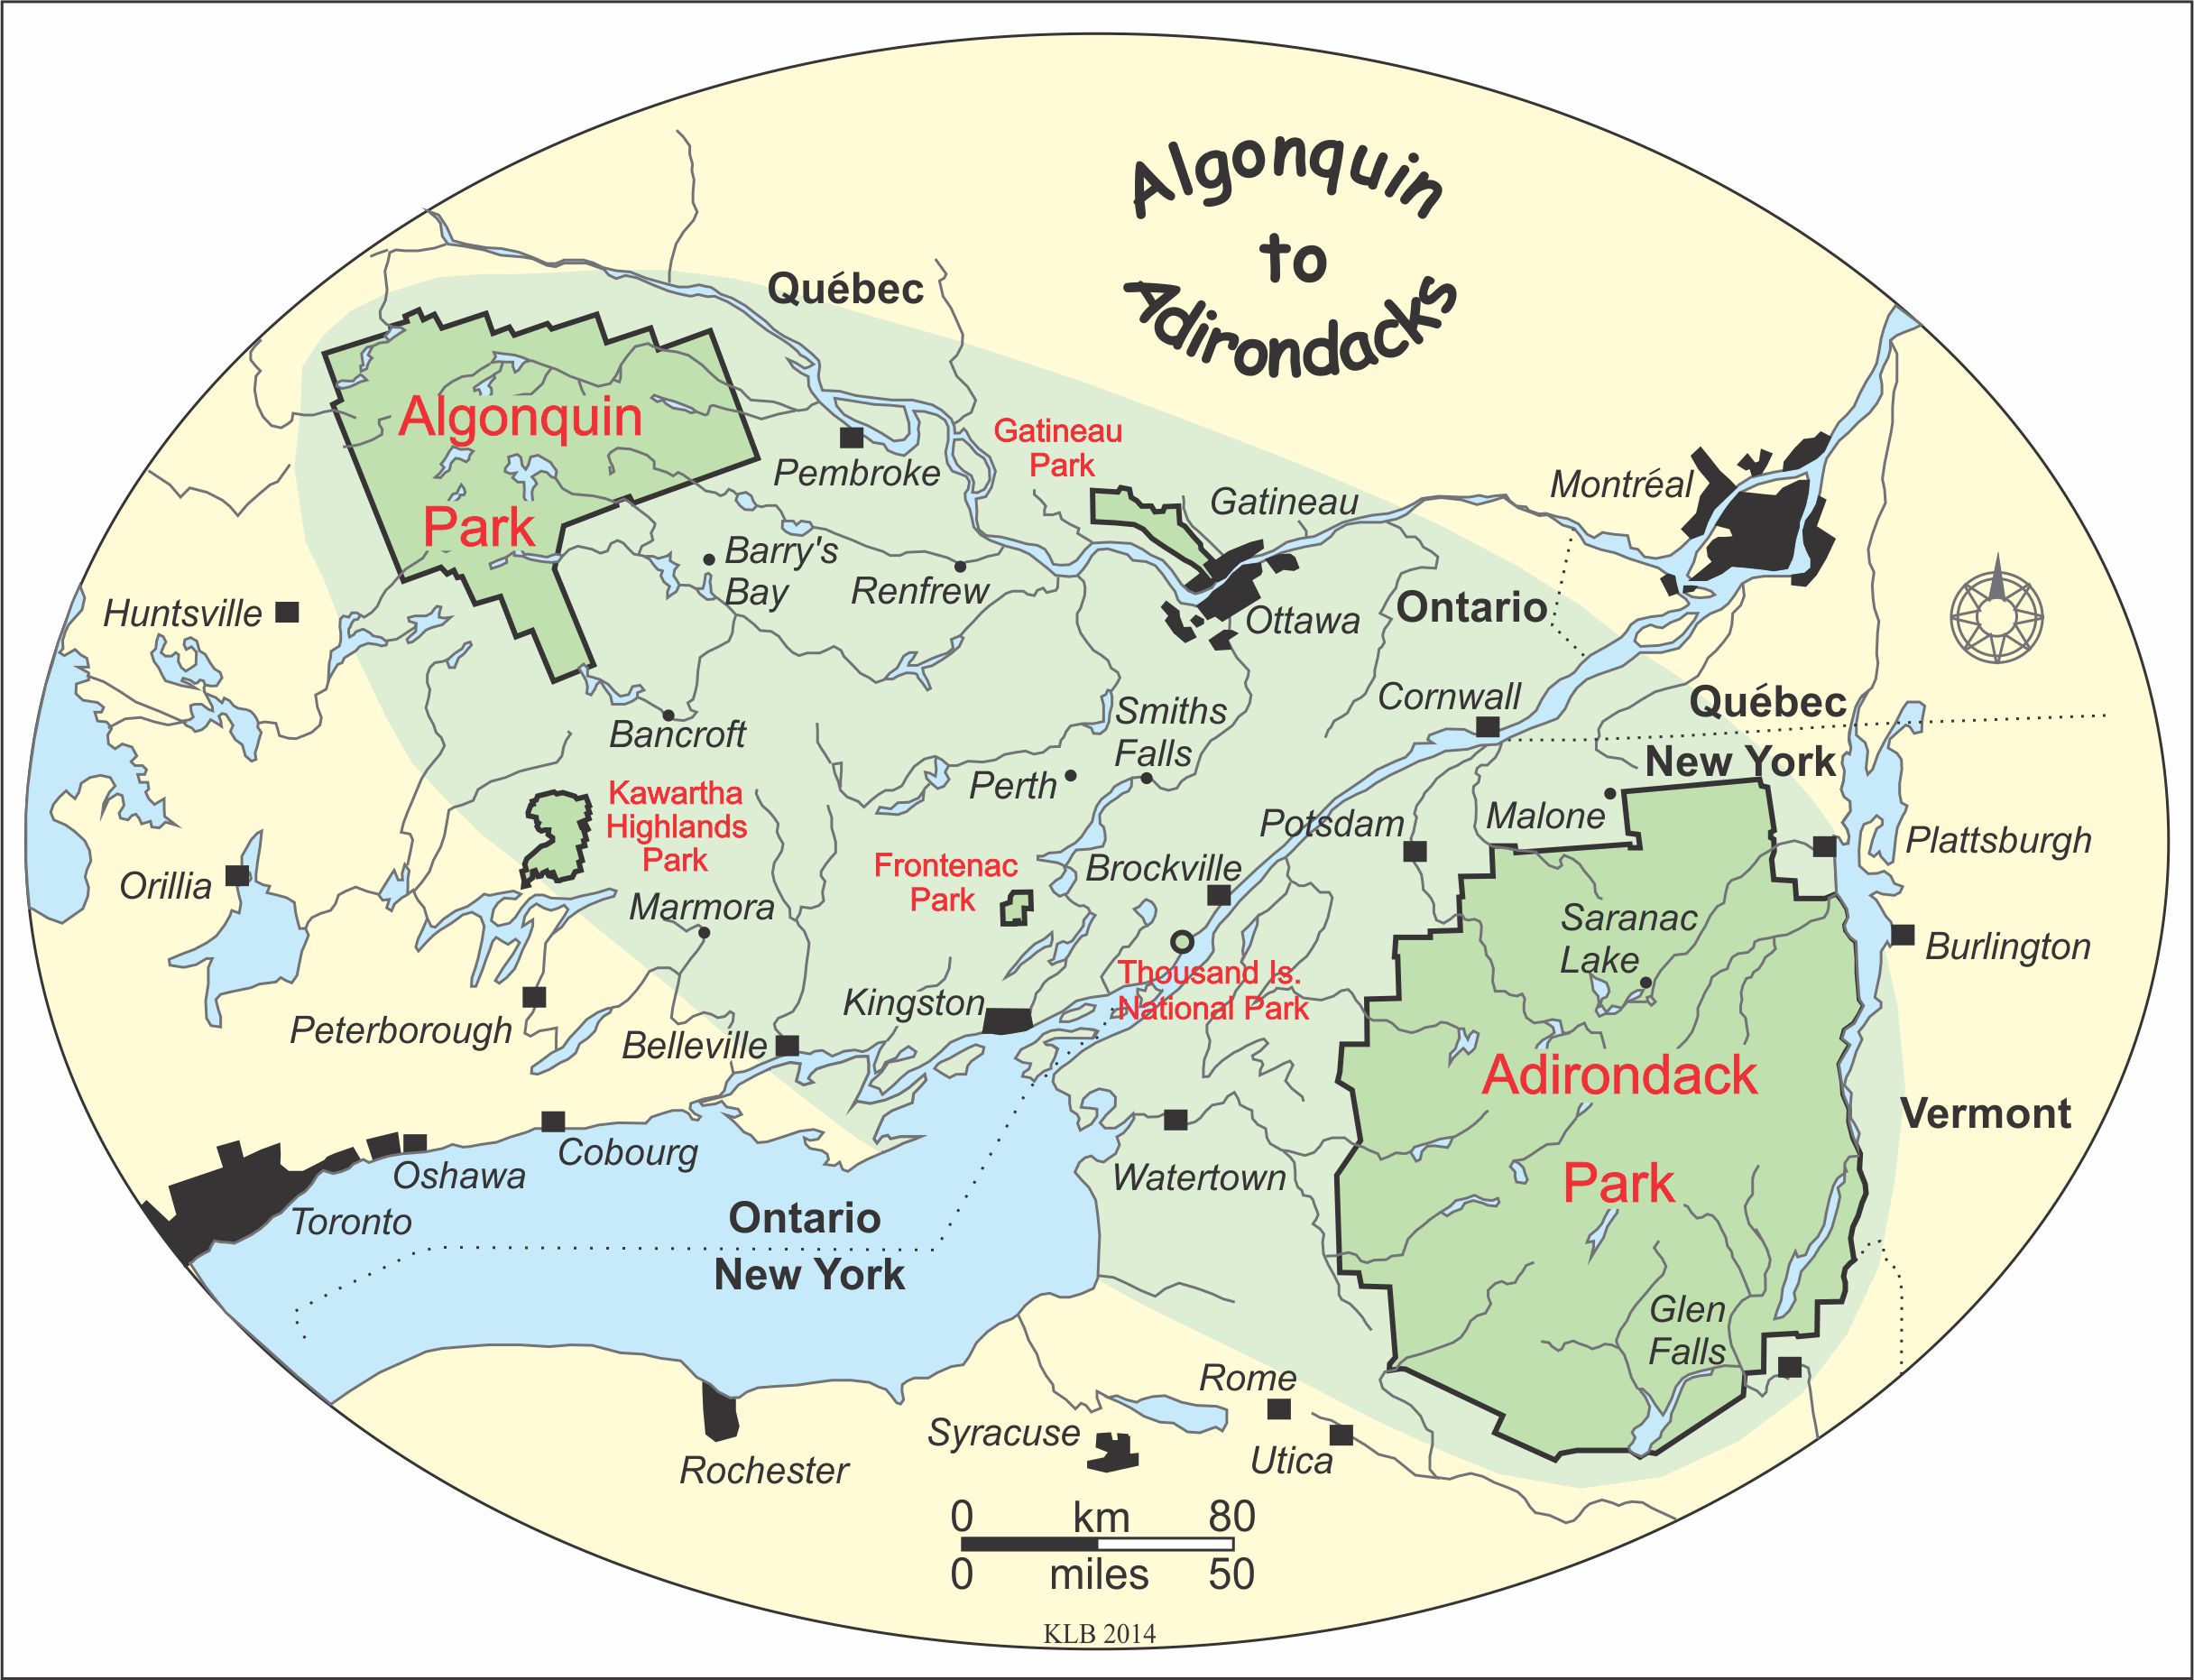 Staying connected from Algonquin to the Adirondacks